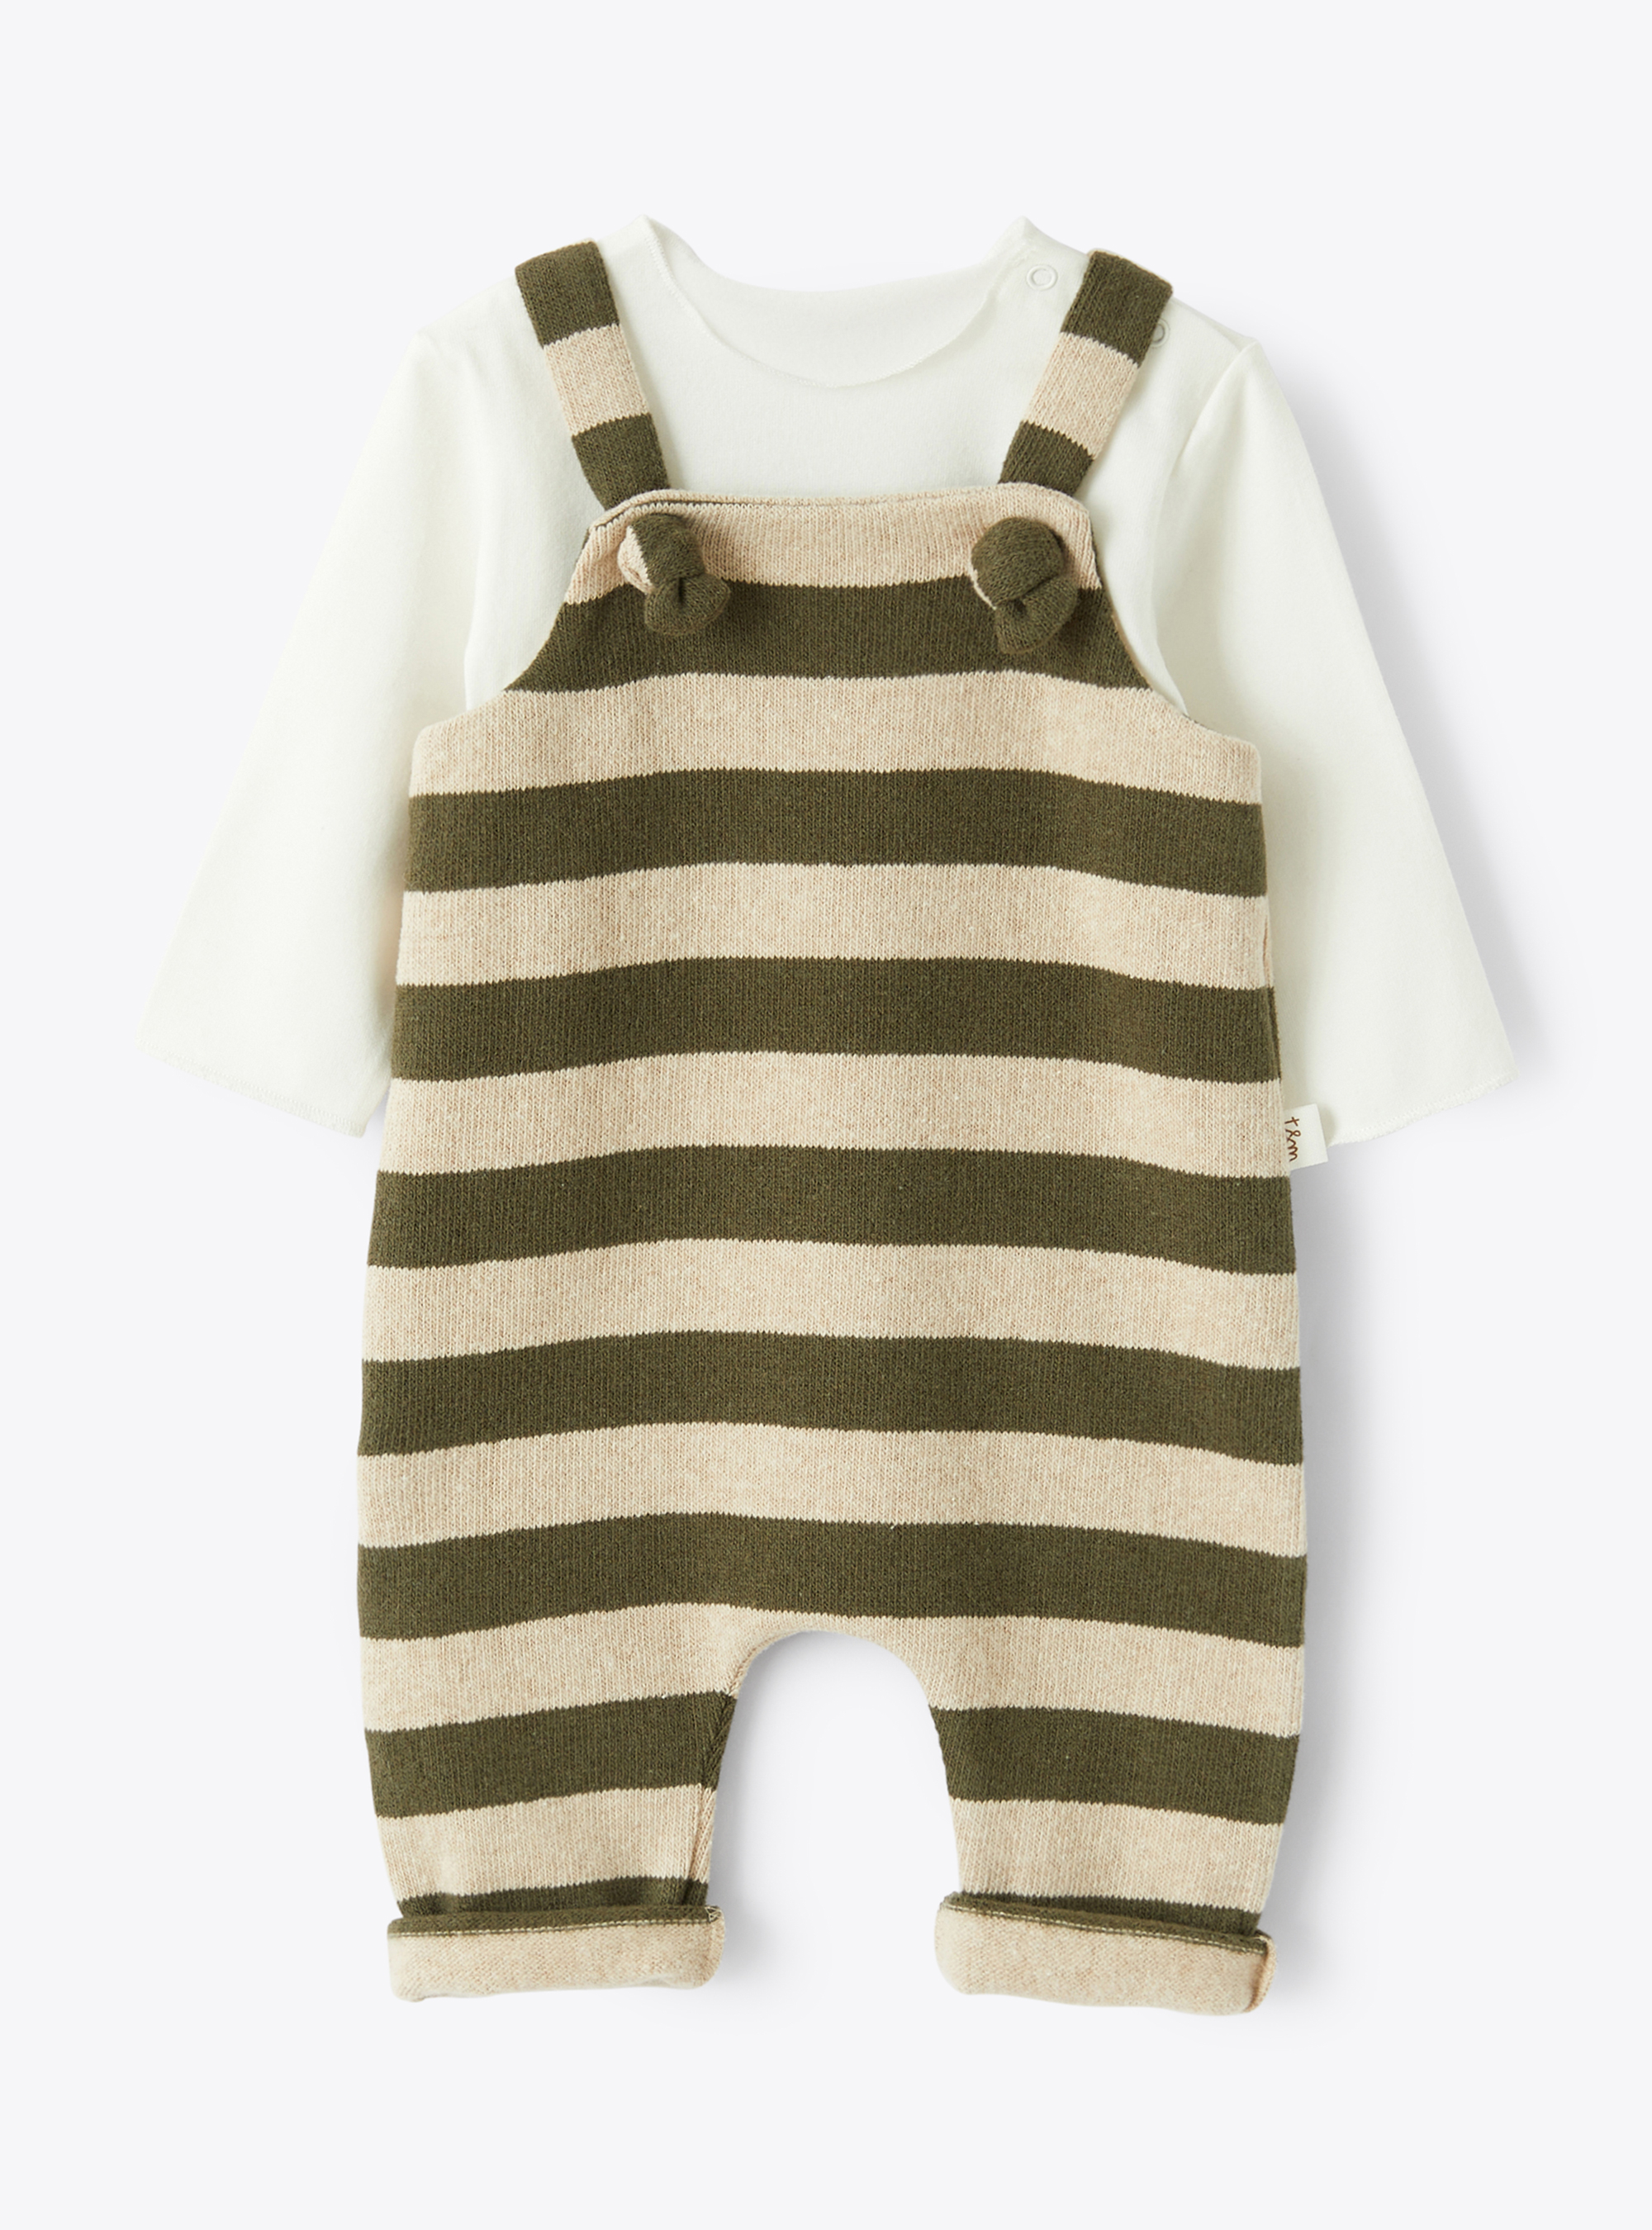 Two-piece tricot-knit dungaree set - Two-piece sets - Il Gufo